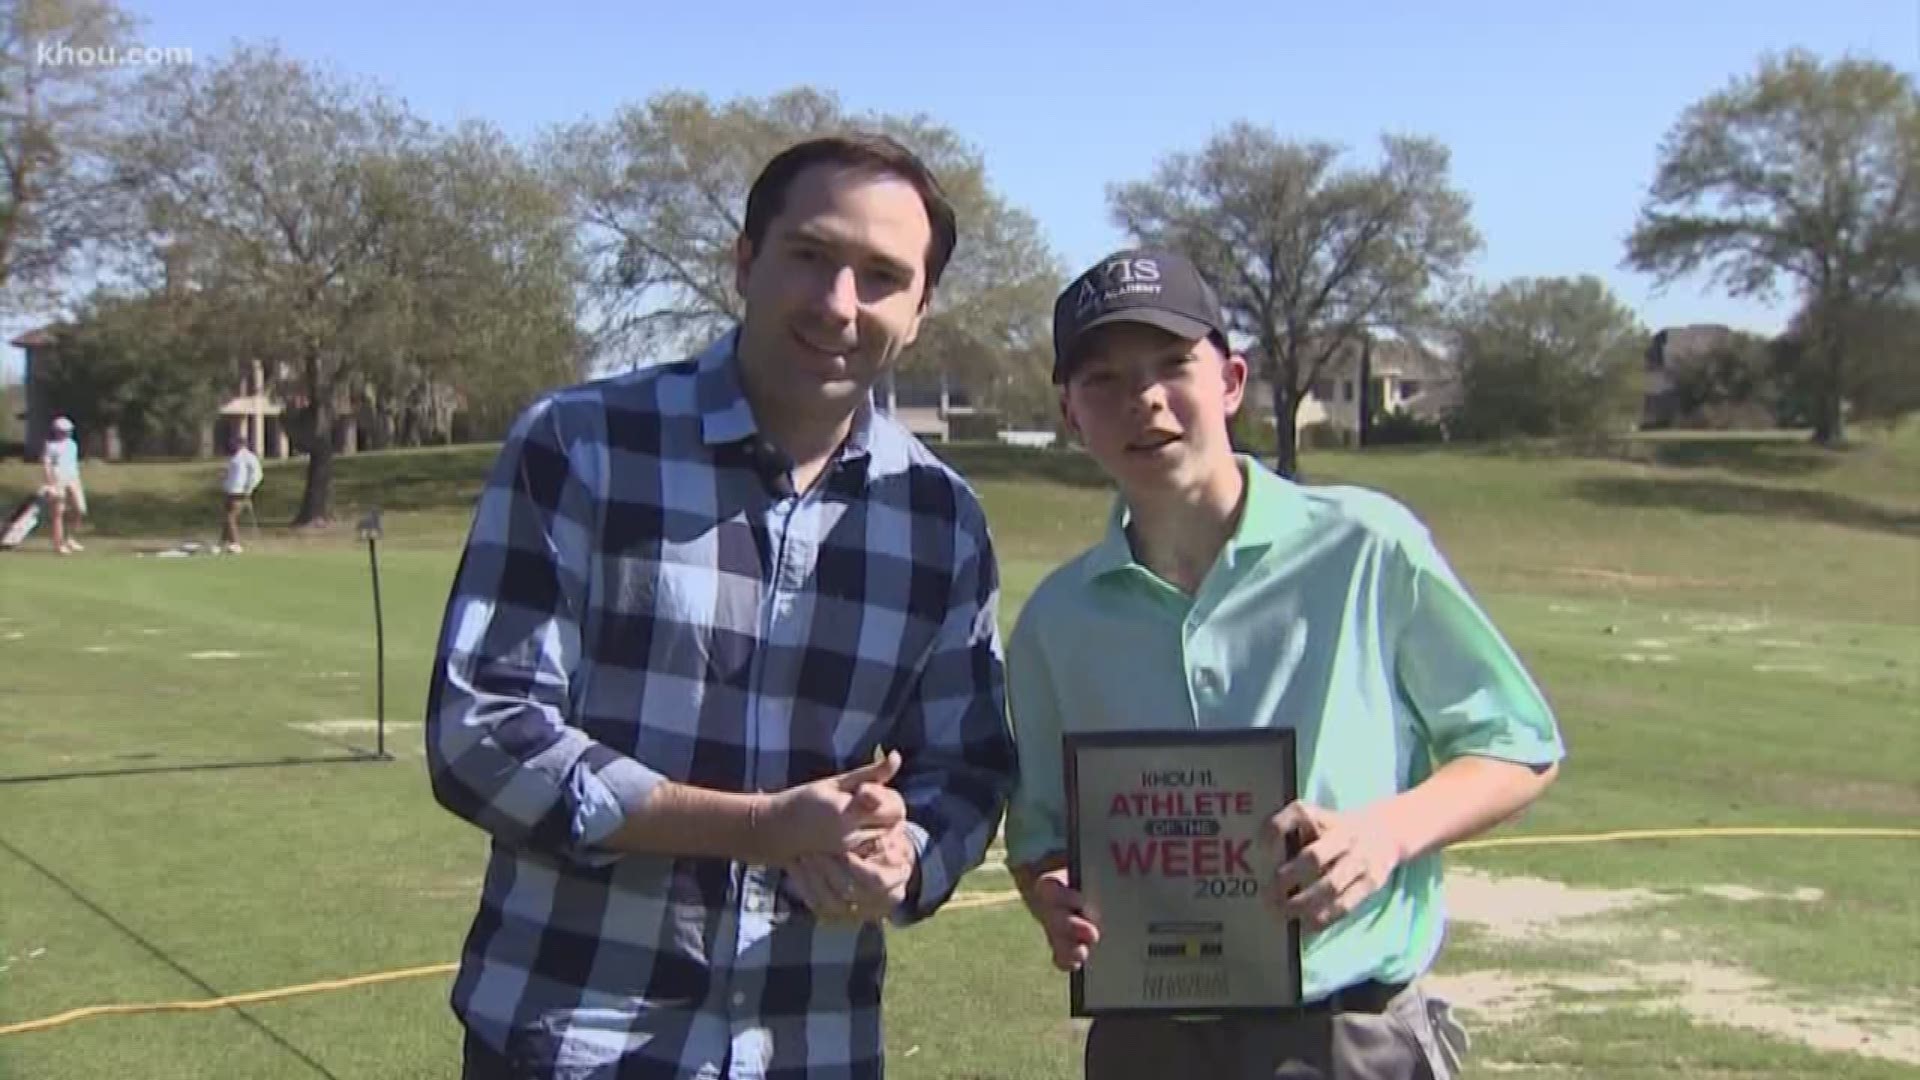 This young man who was set to compete in a junior competition at Augusta National. While the tournament has been postponed, his game is still going strong.